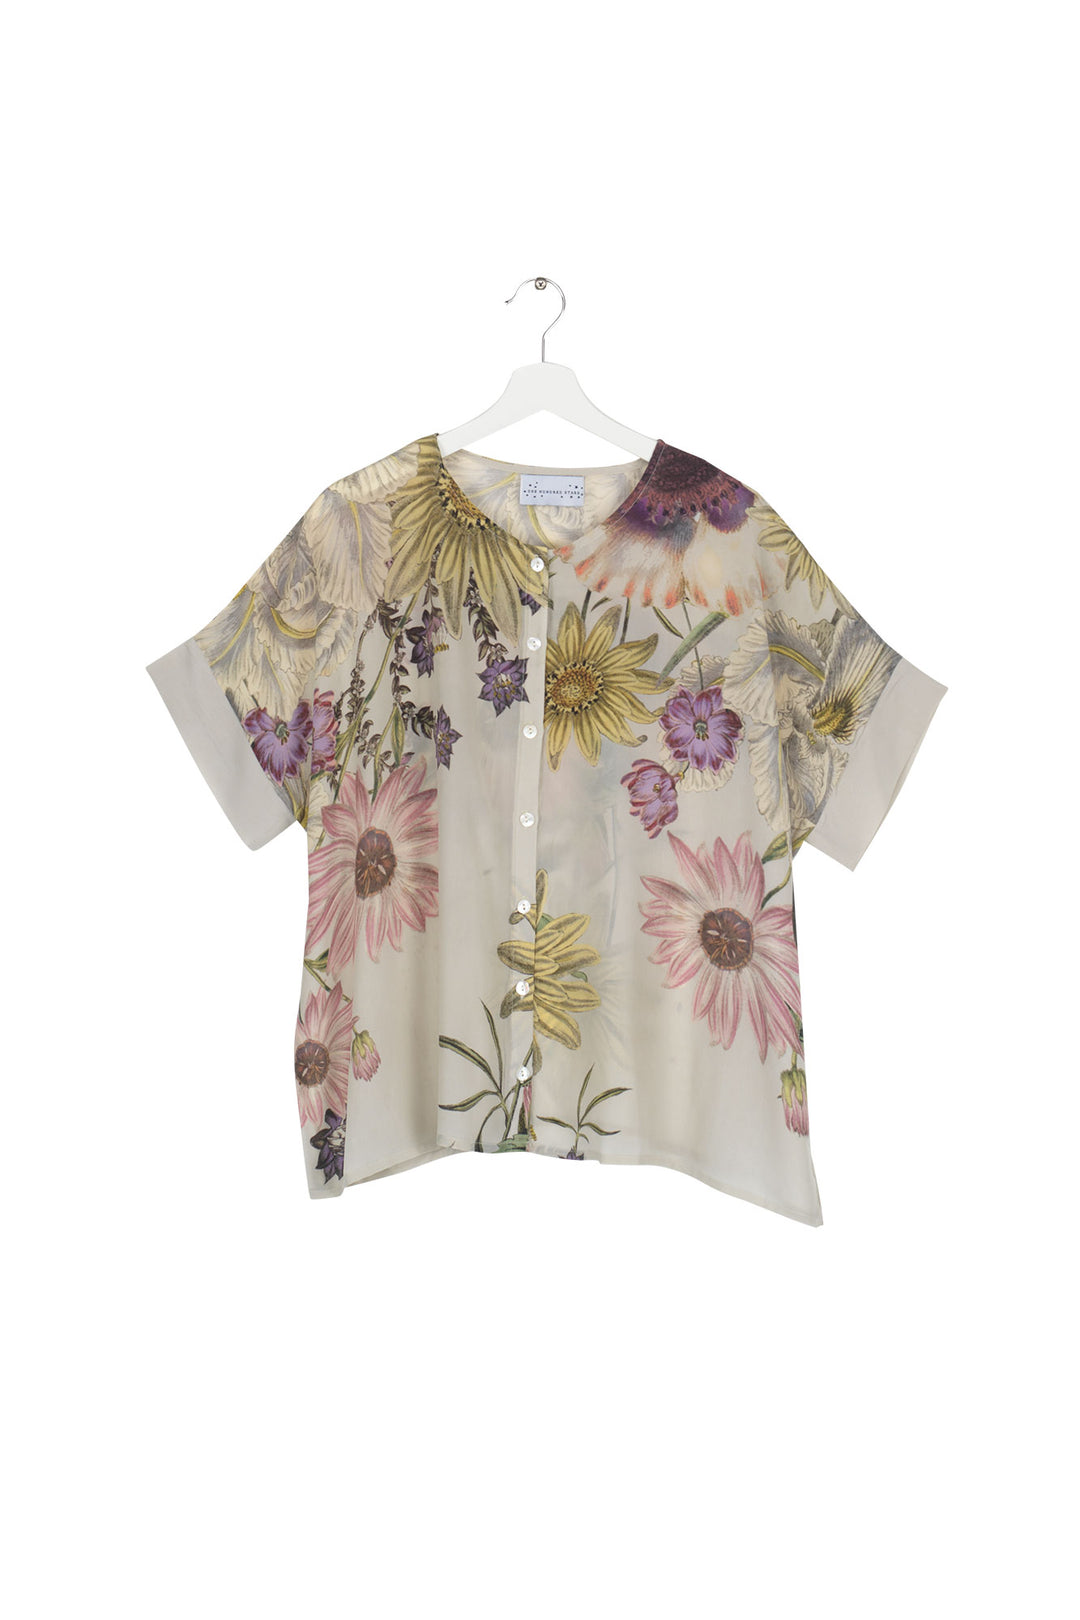 Women's short sleeve button up blouse in stone with daisy floral print by One Hundred Stars